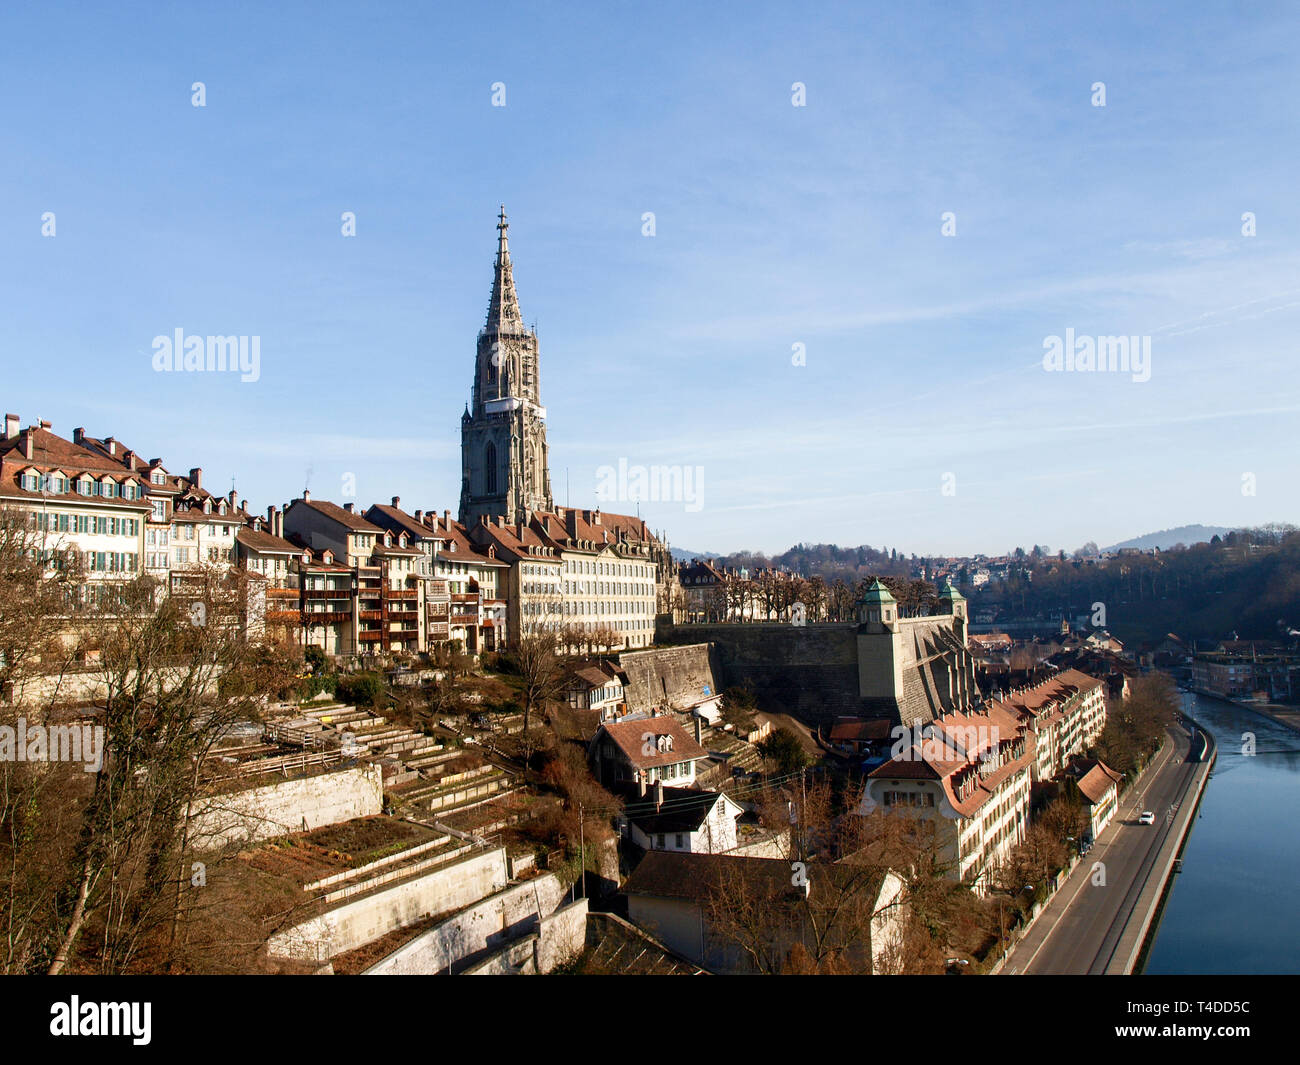 Bern, Switzerland - December 23, 2016: The Old Town of the Capital of the Swiss Confederation Stock Photo